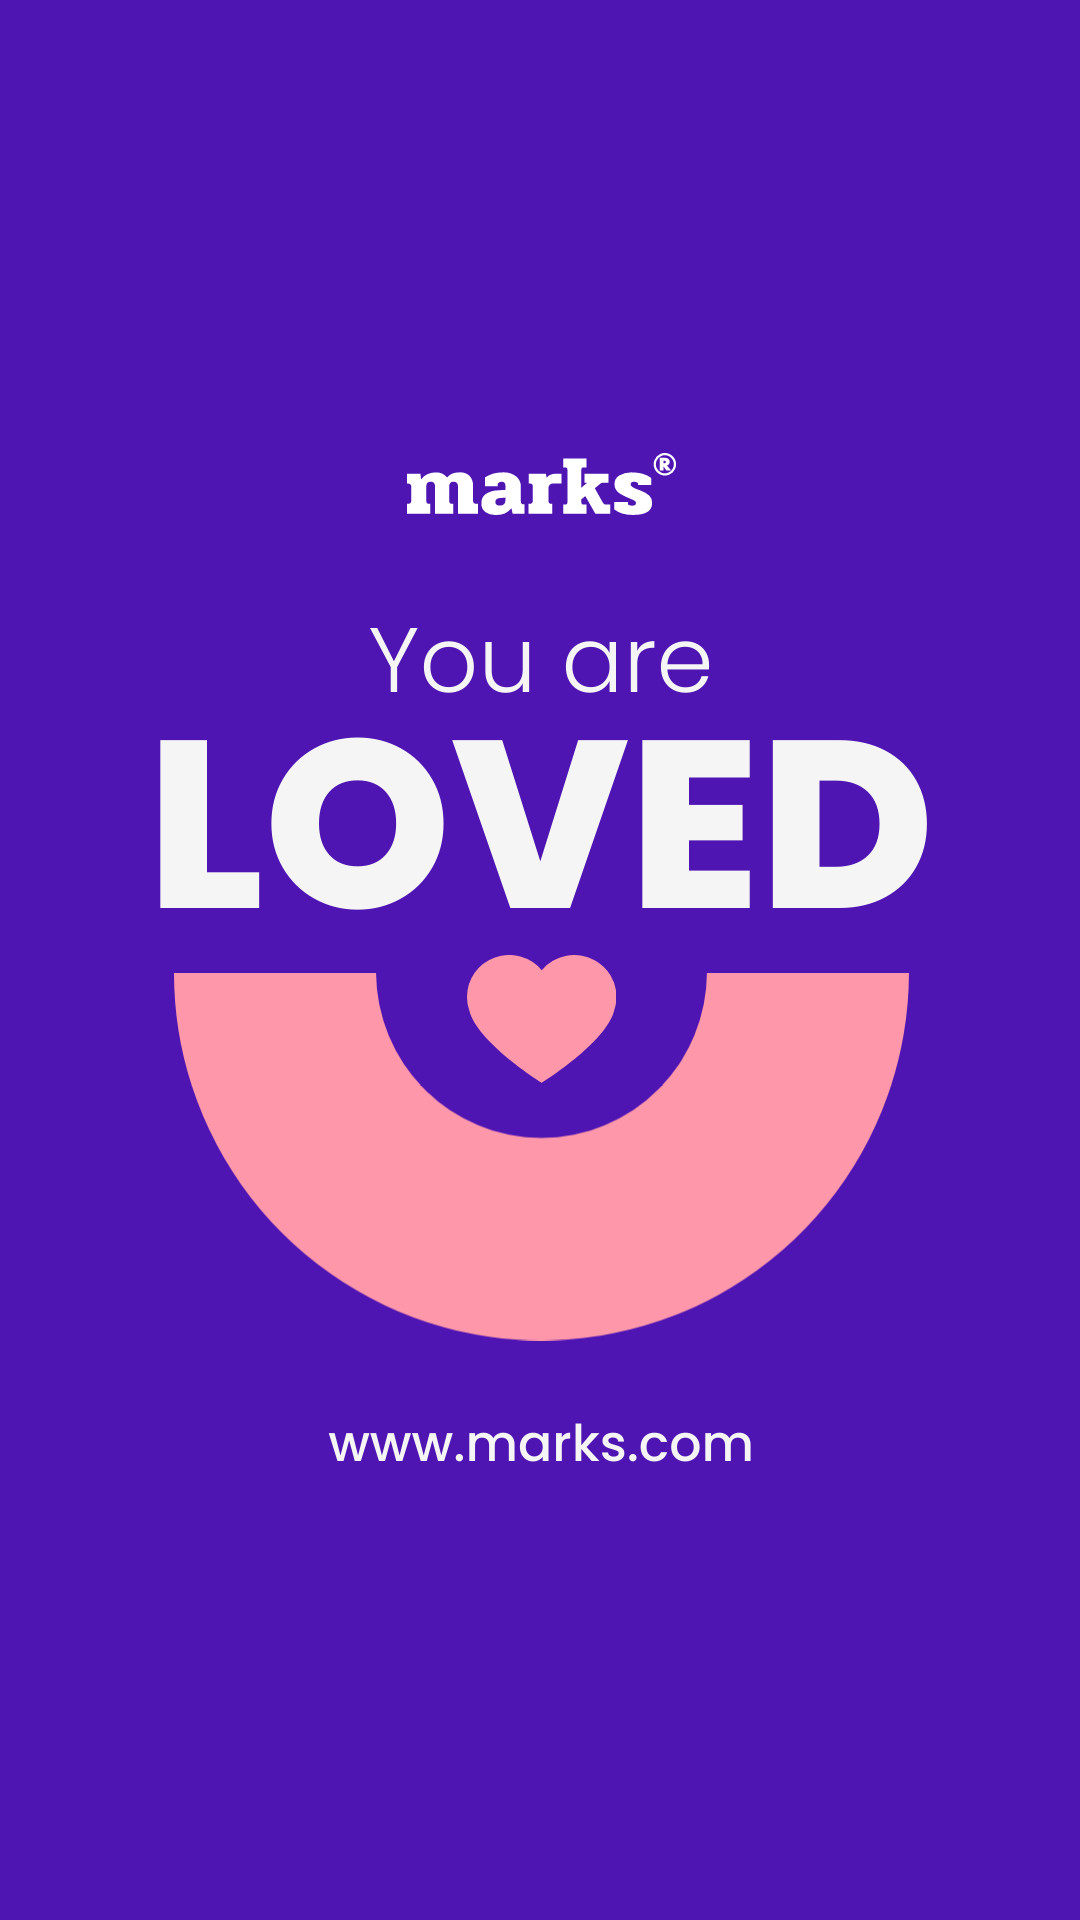 Marks You Are Loved Valentine's Day Facebook Cover 820x360